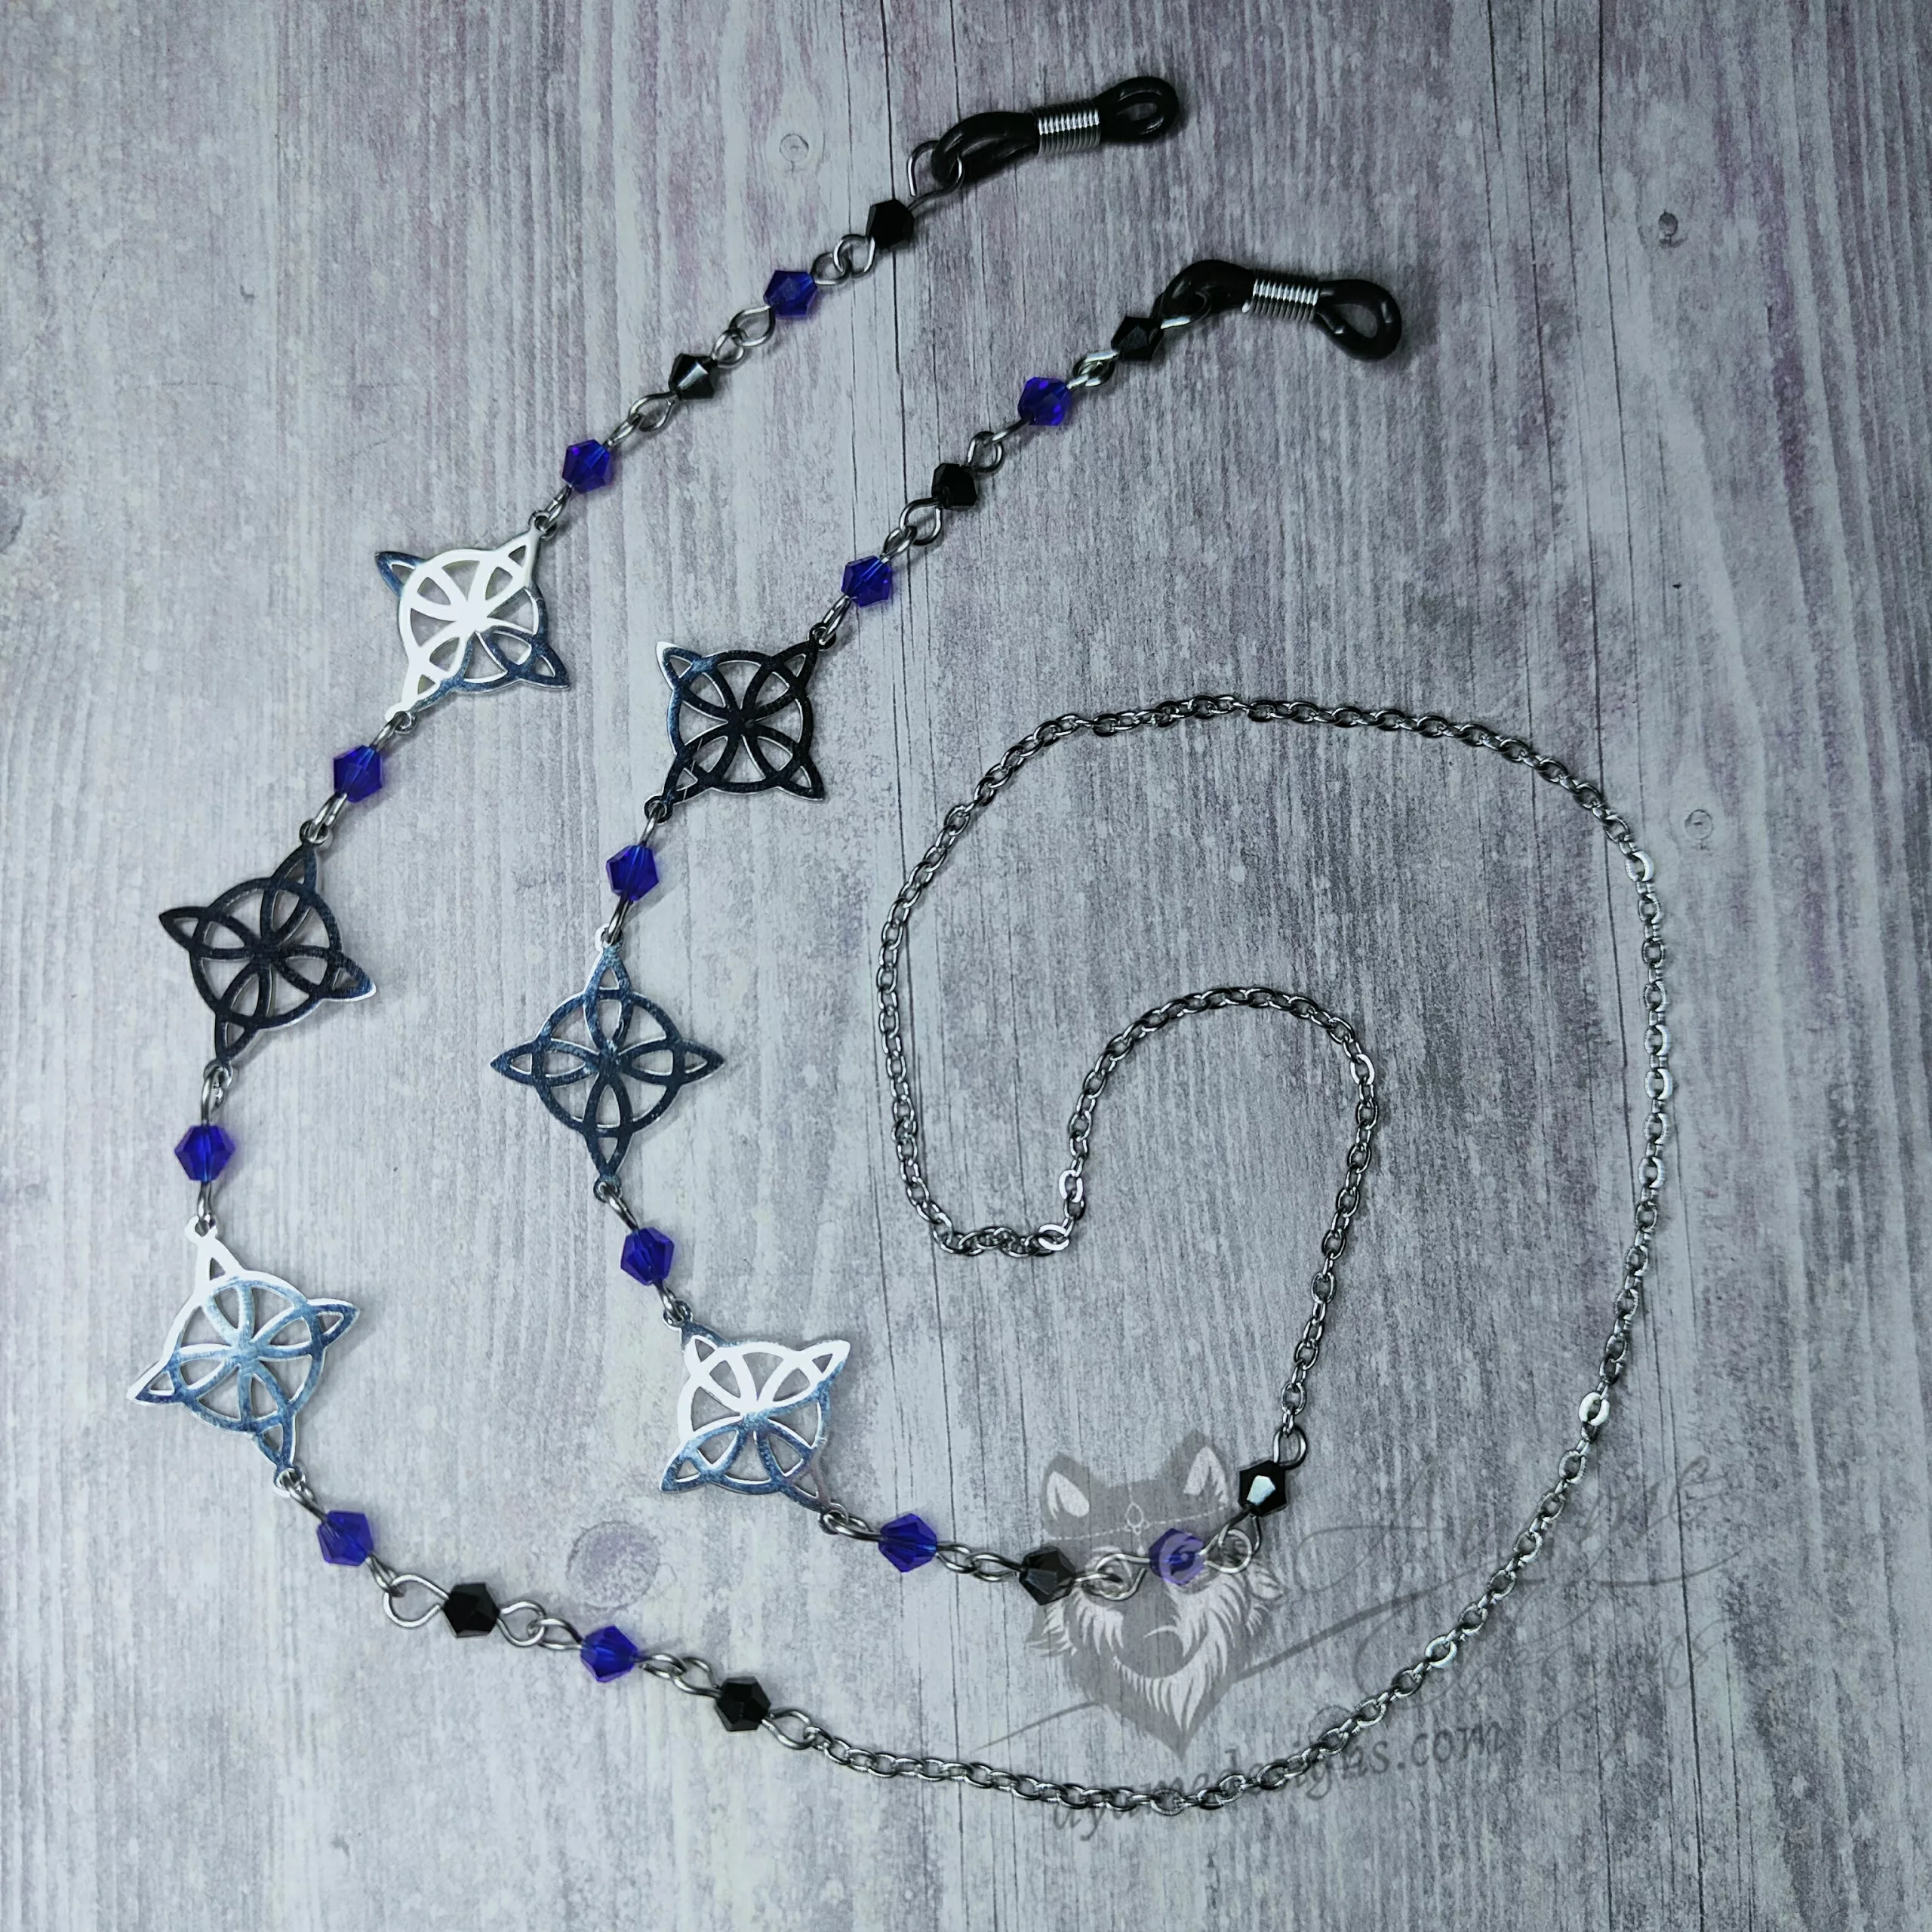 A handmade glasses chain made with laser cut stainless steel witch's knot pendants (three on each side), Austrian crystal beads and stainless steel chain